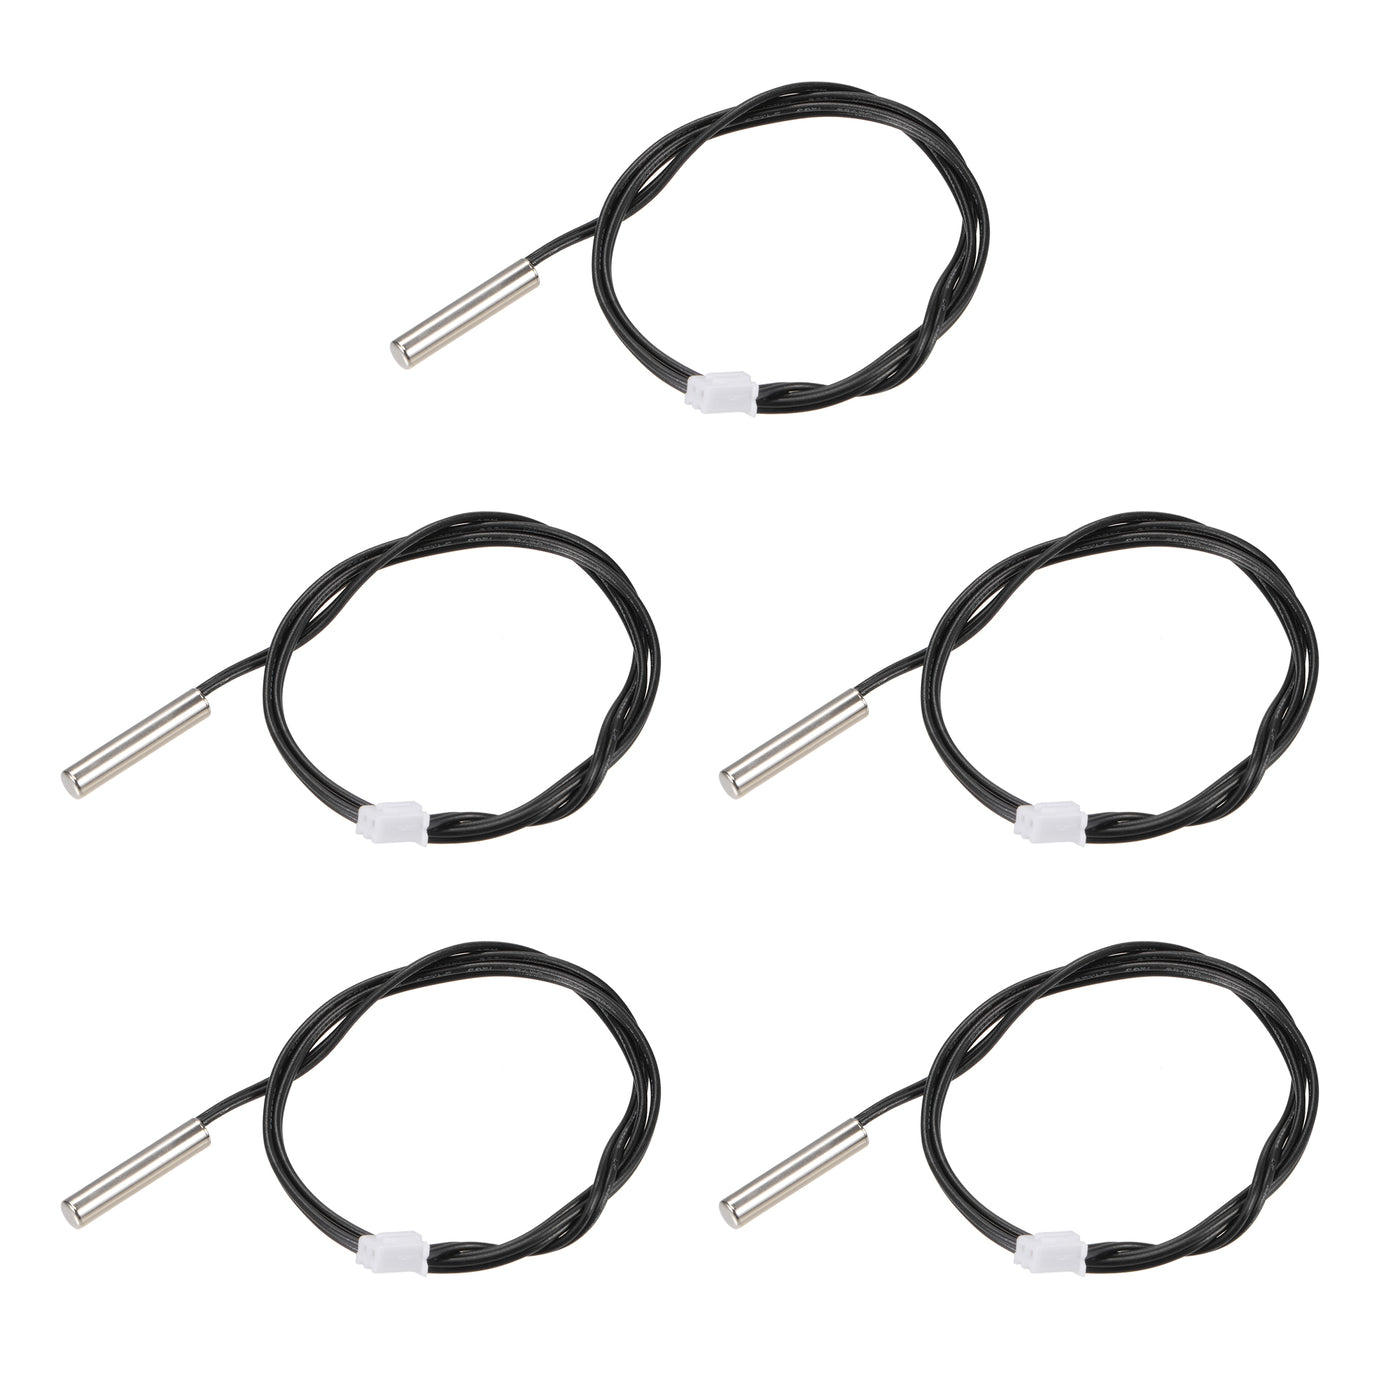 uxcell Uxcell 5pcs 10K Temperature Sensor Probe, Stainless Steel NTC Thermal Sensor Probe 50cm Digital Thermometer Extension Cable